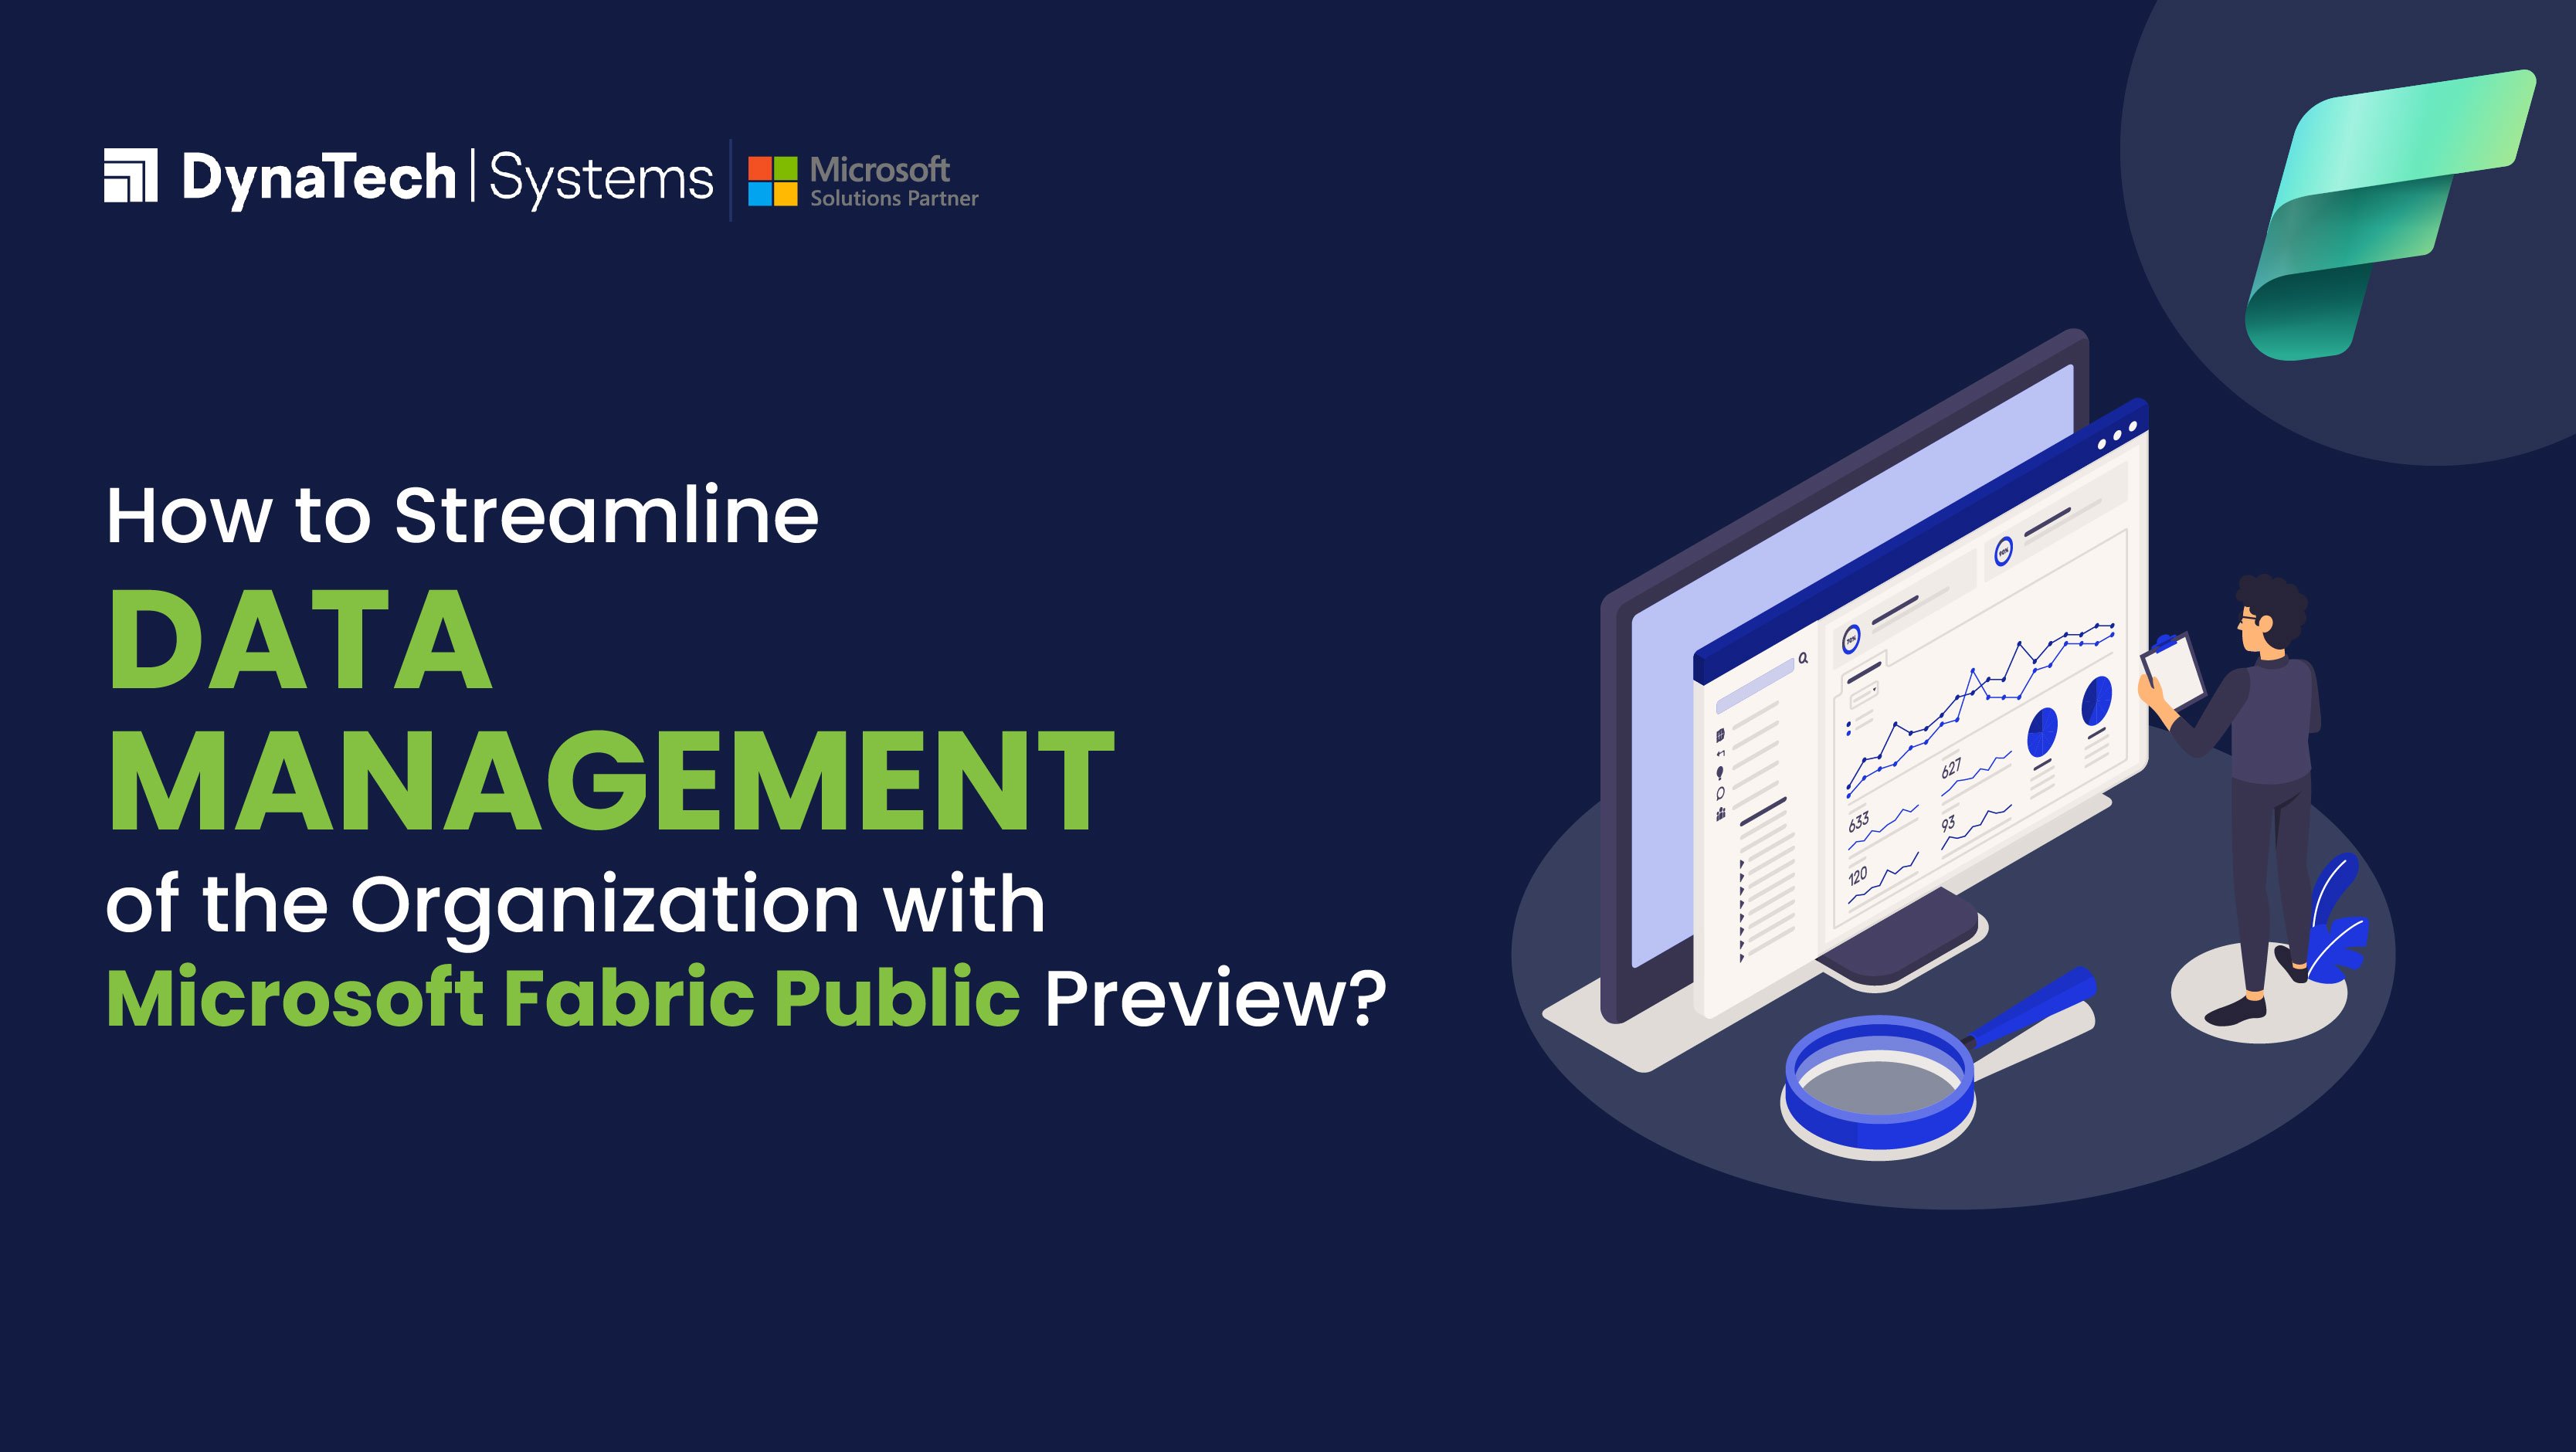 How to Streamline Data Management of the Organization with Microsoft Fabric Public Preview?